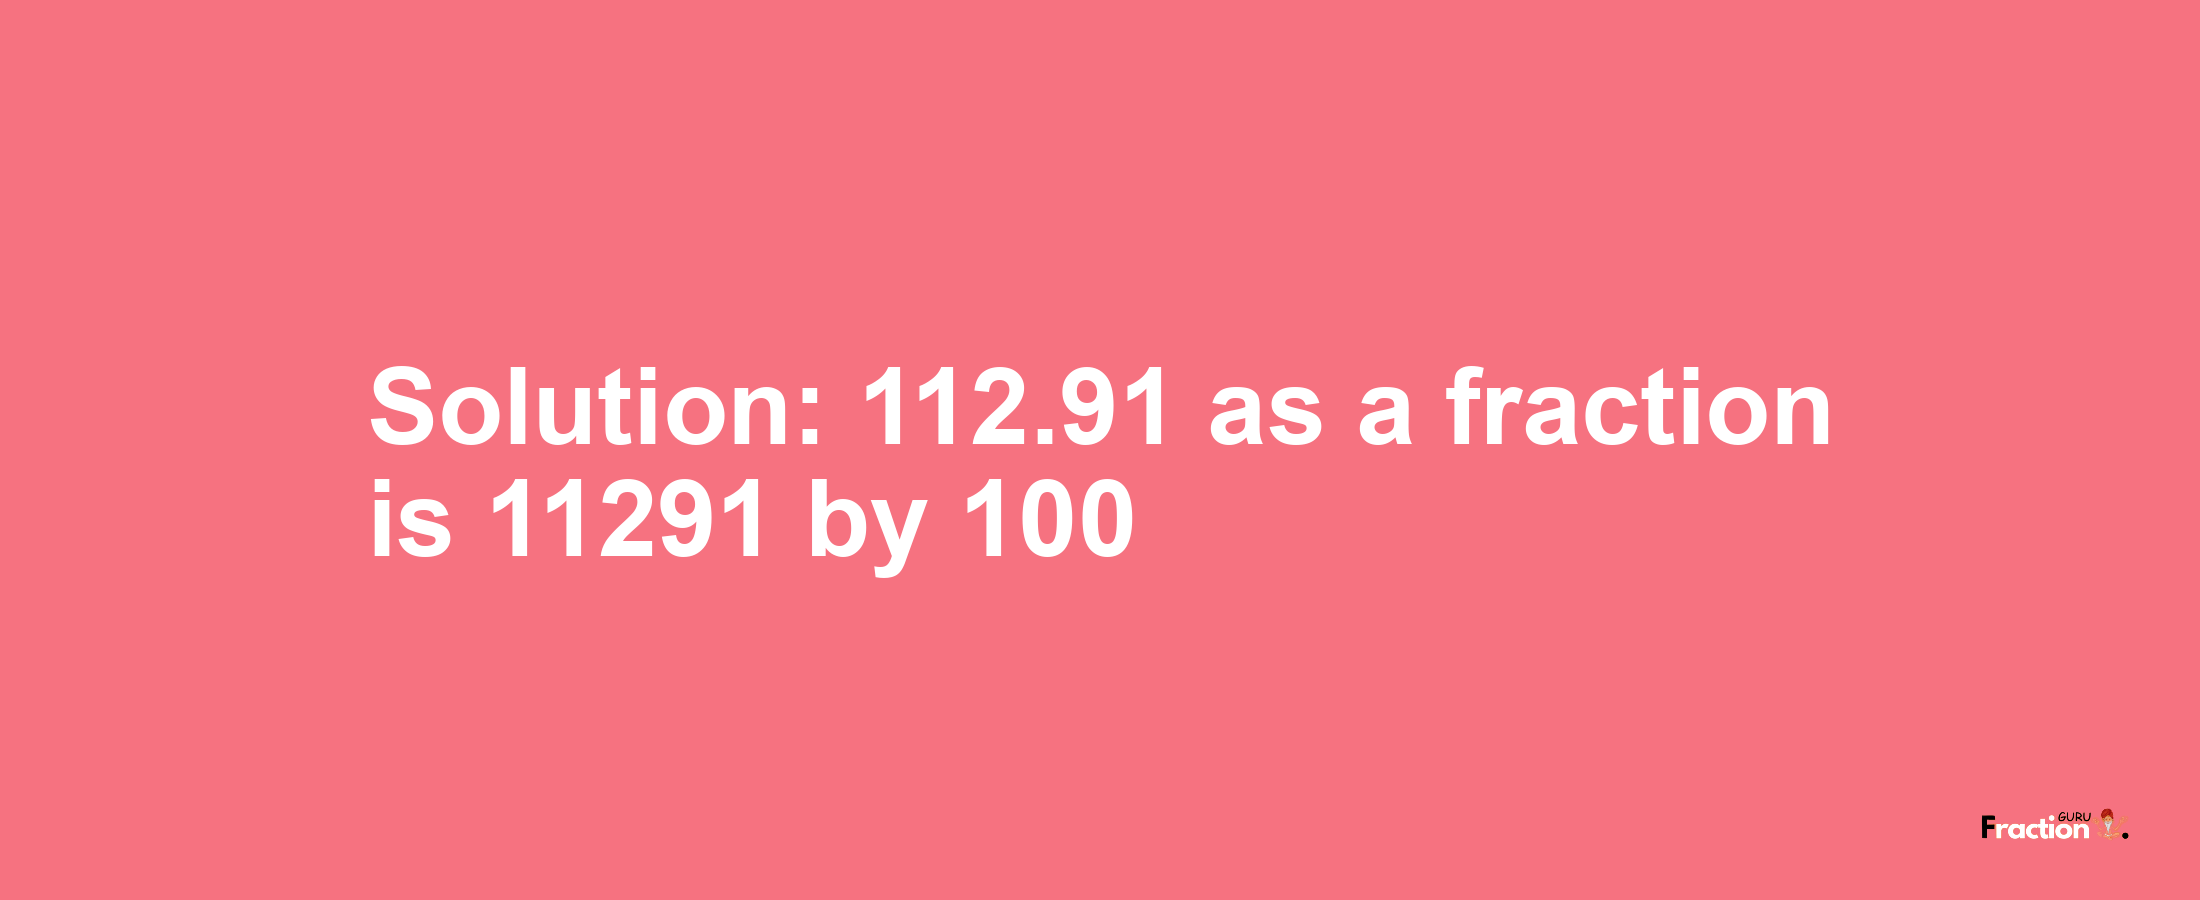 Solution:112.91 as a fraction is 11291/100